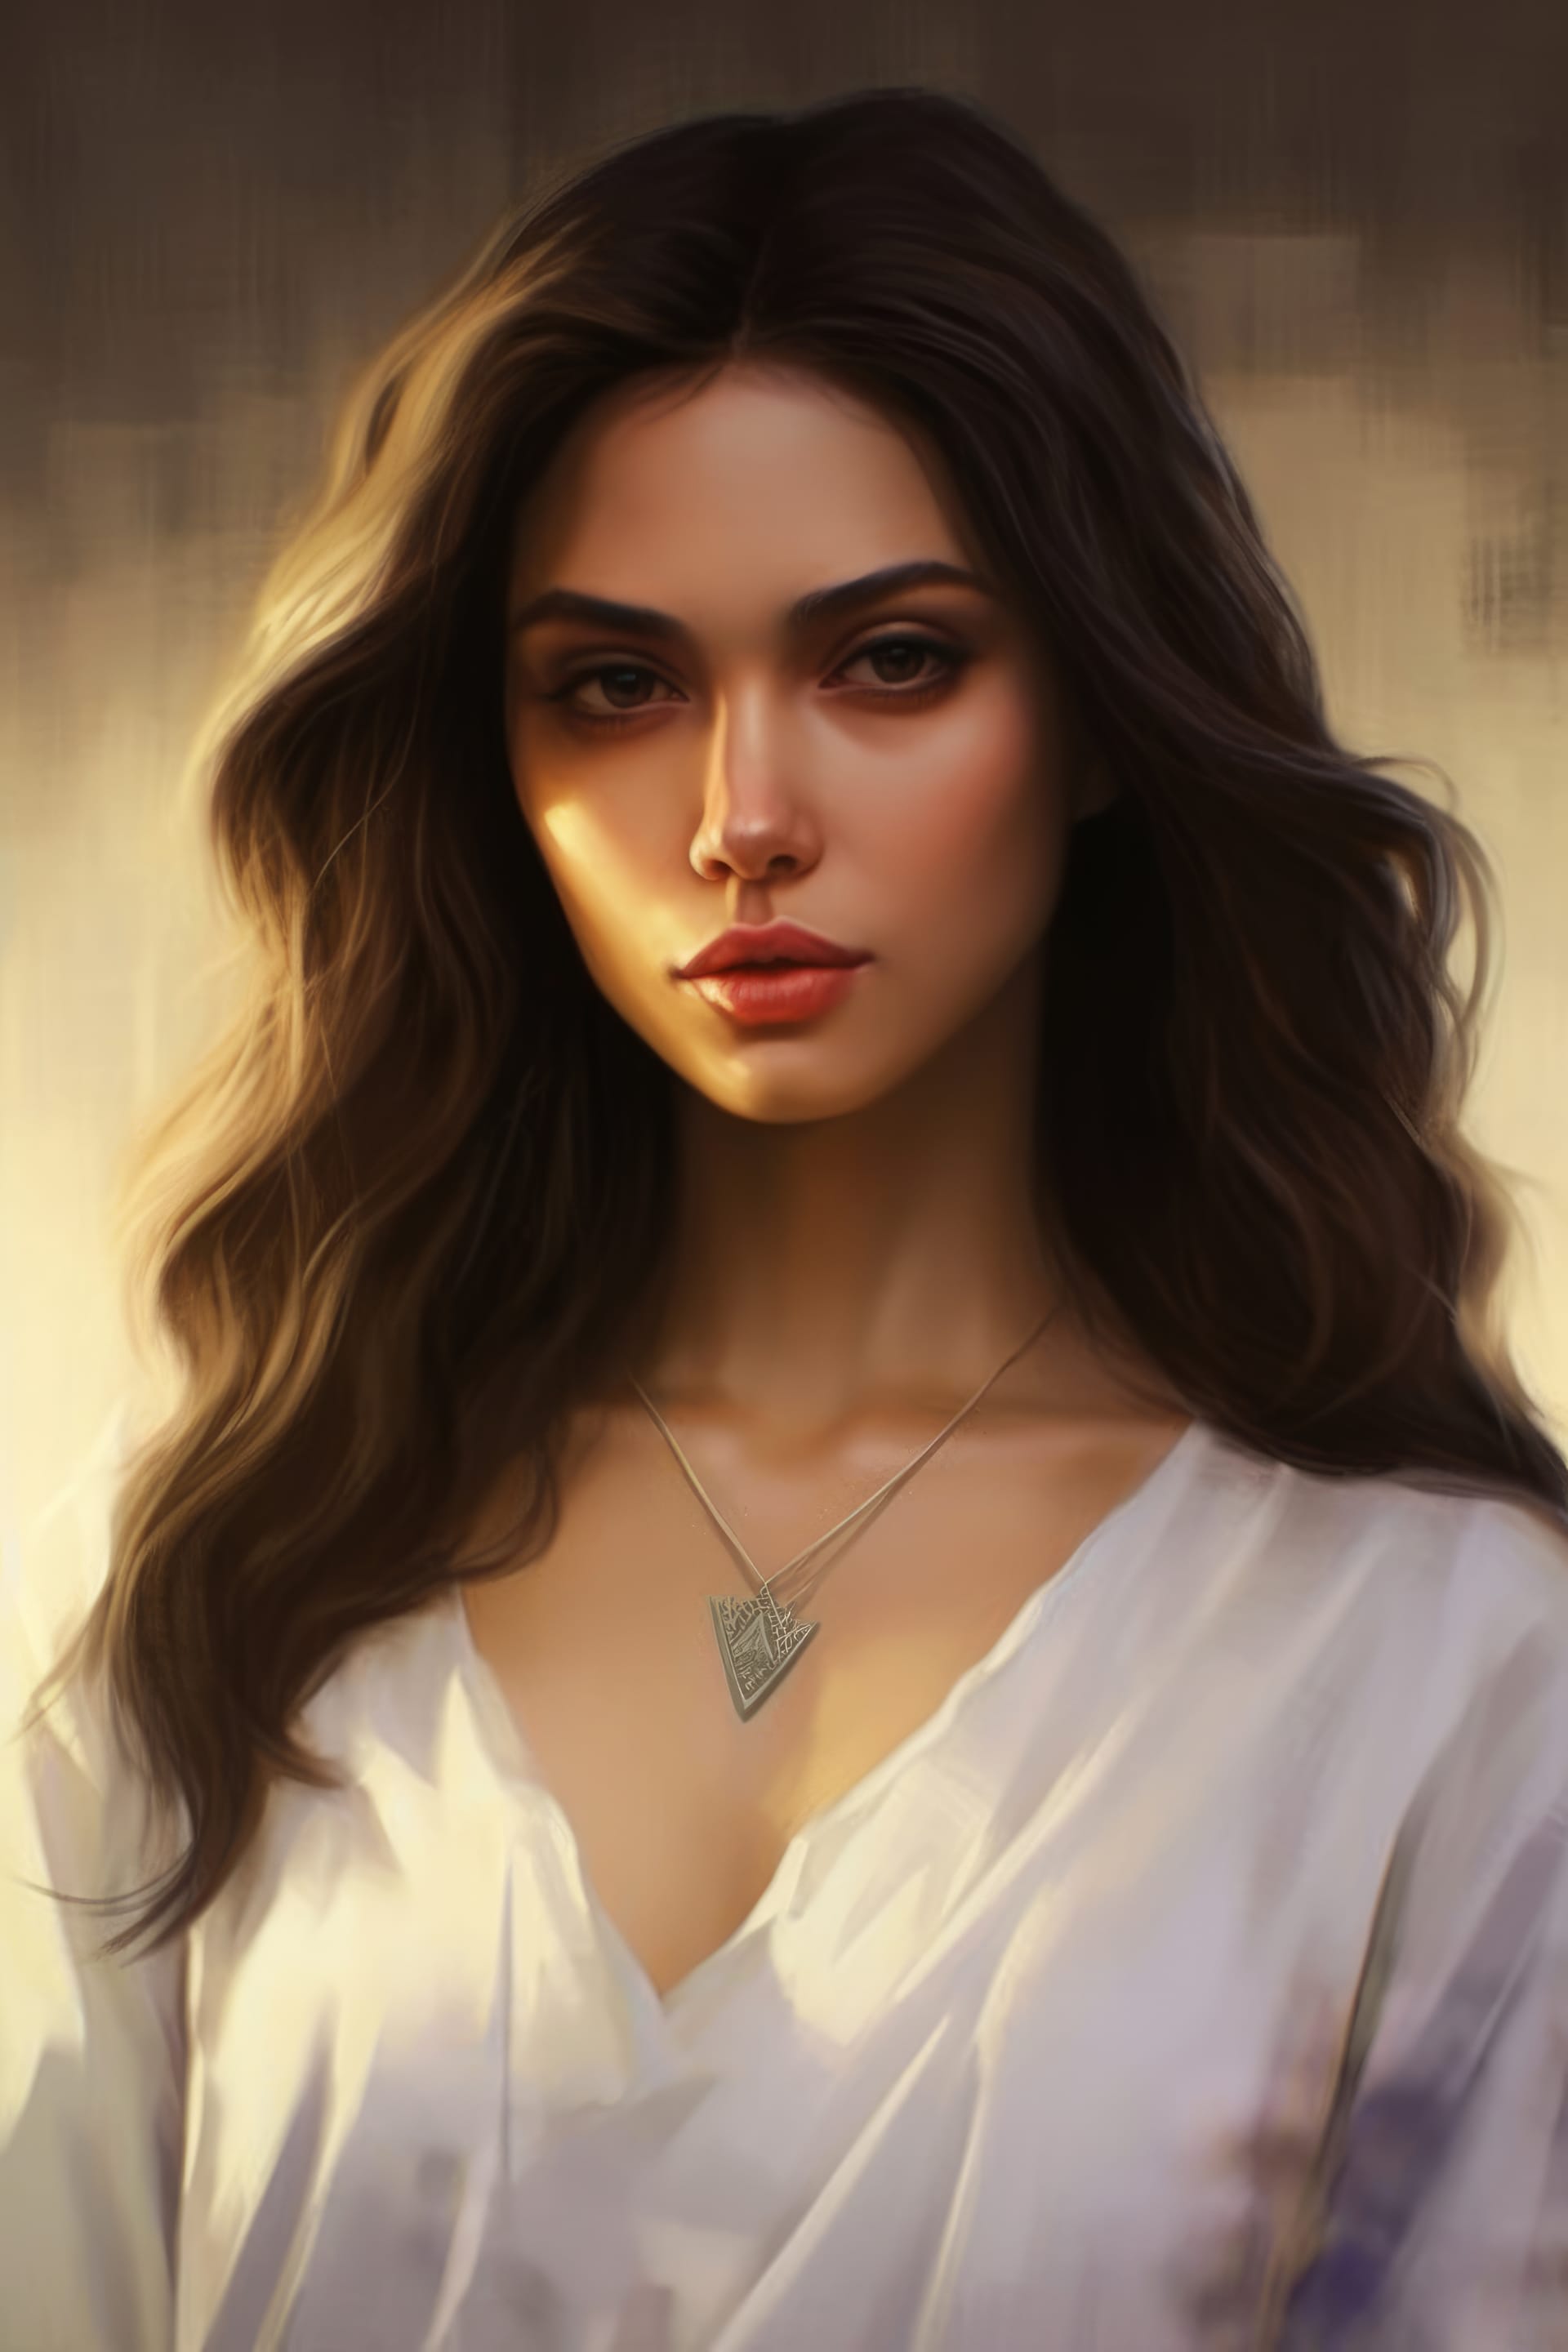 Best profile picture for facebook girl with necklace evocative portraiture